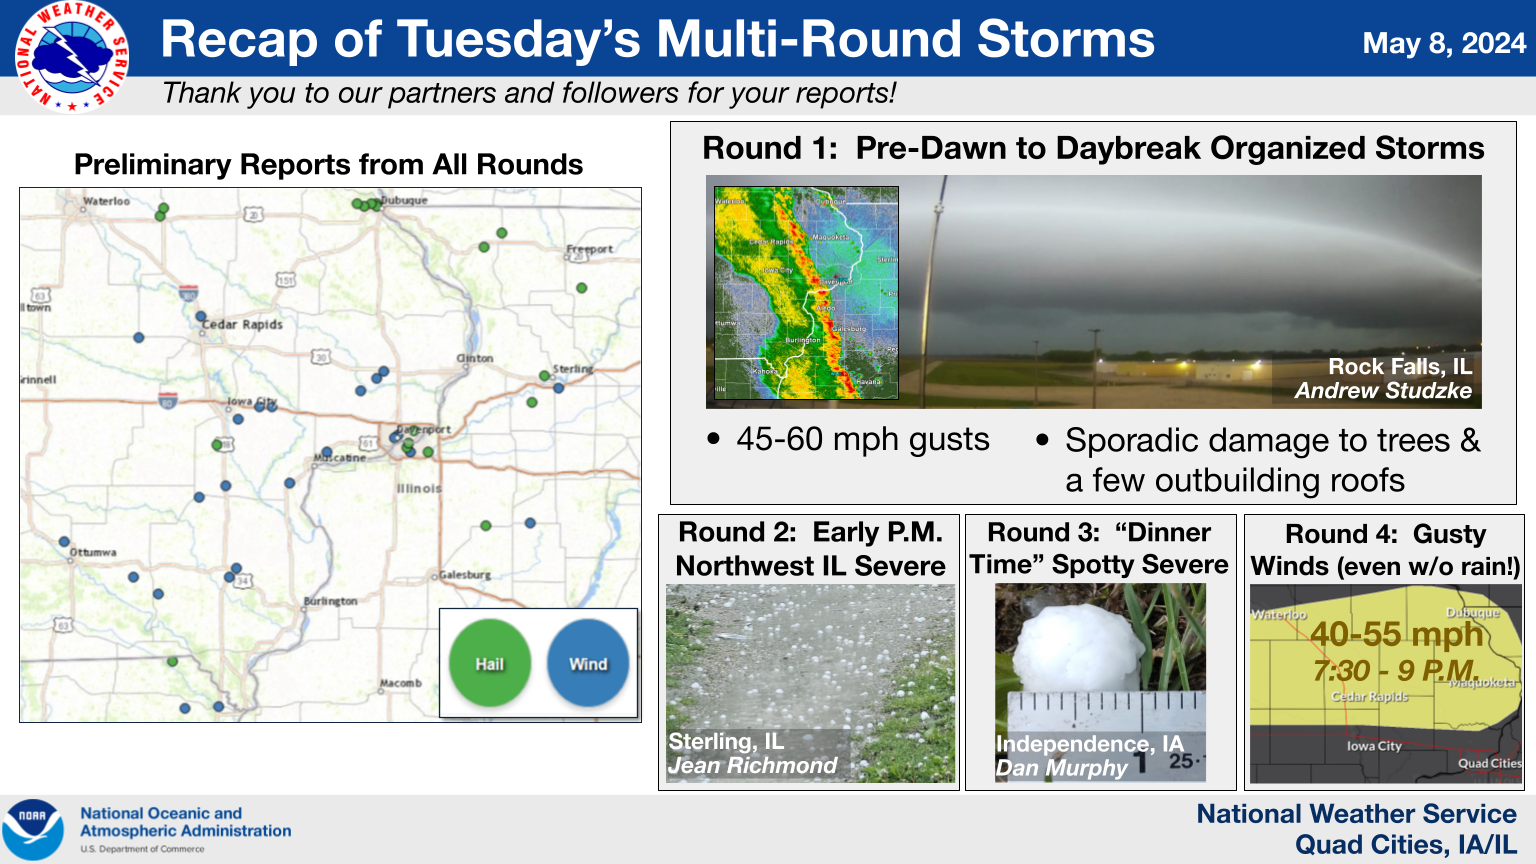 Infographic highlighting Thursday’s multi-round storms. A map of storm reports, and four thumbnails visualizing each round throughout the day.